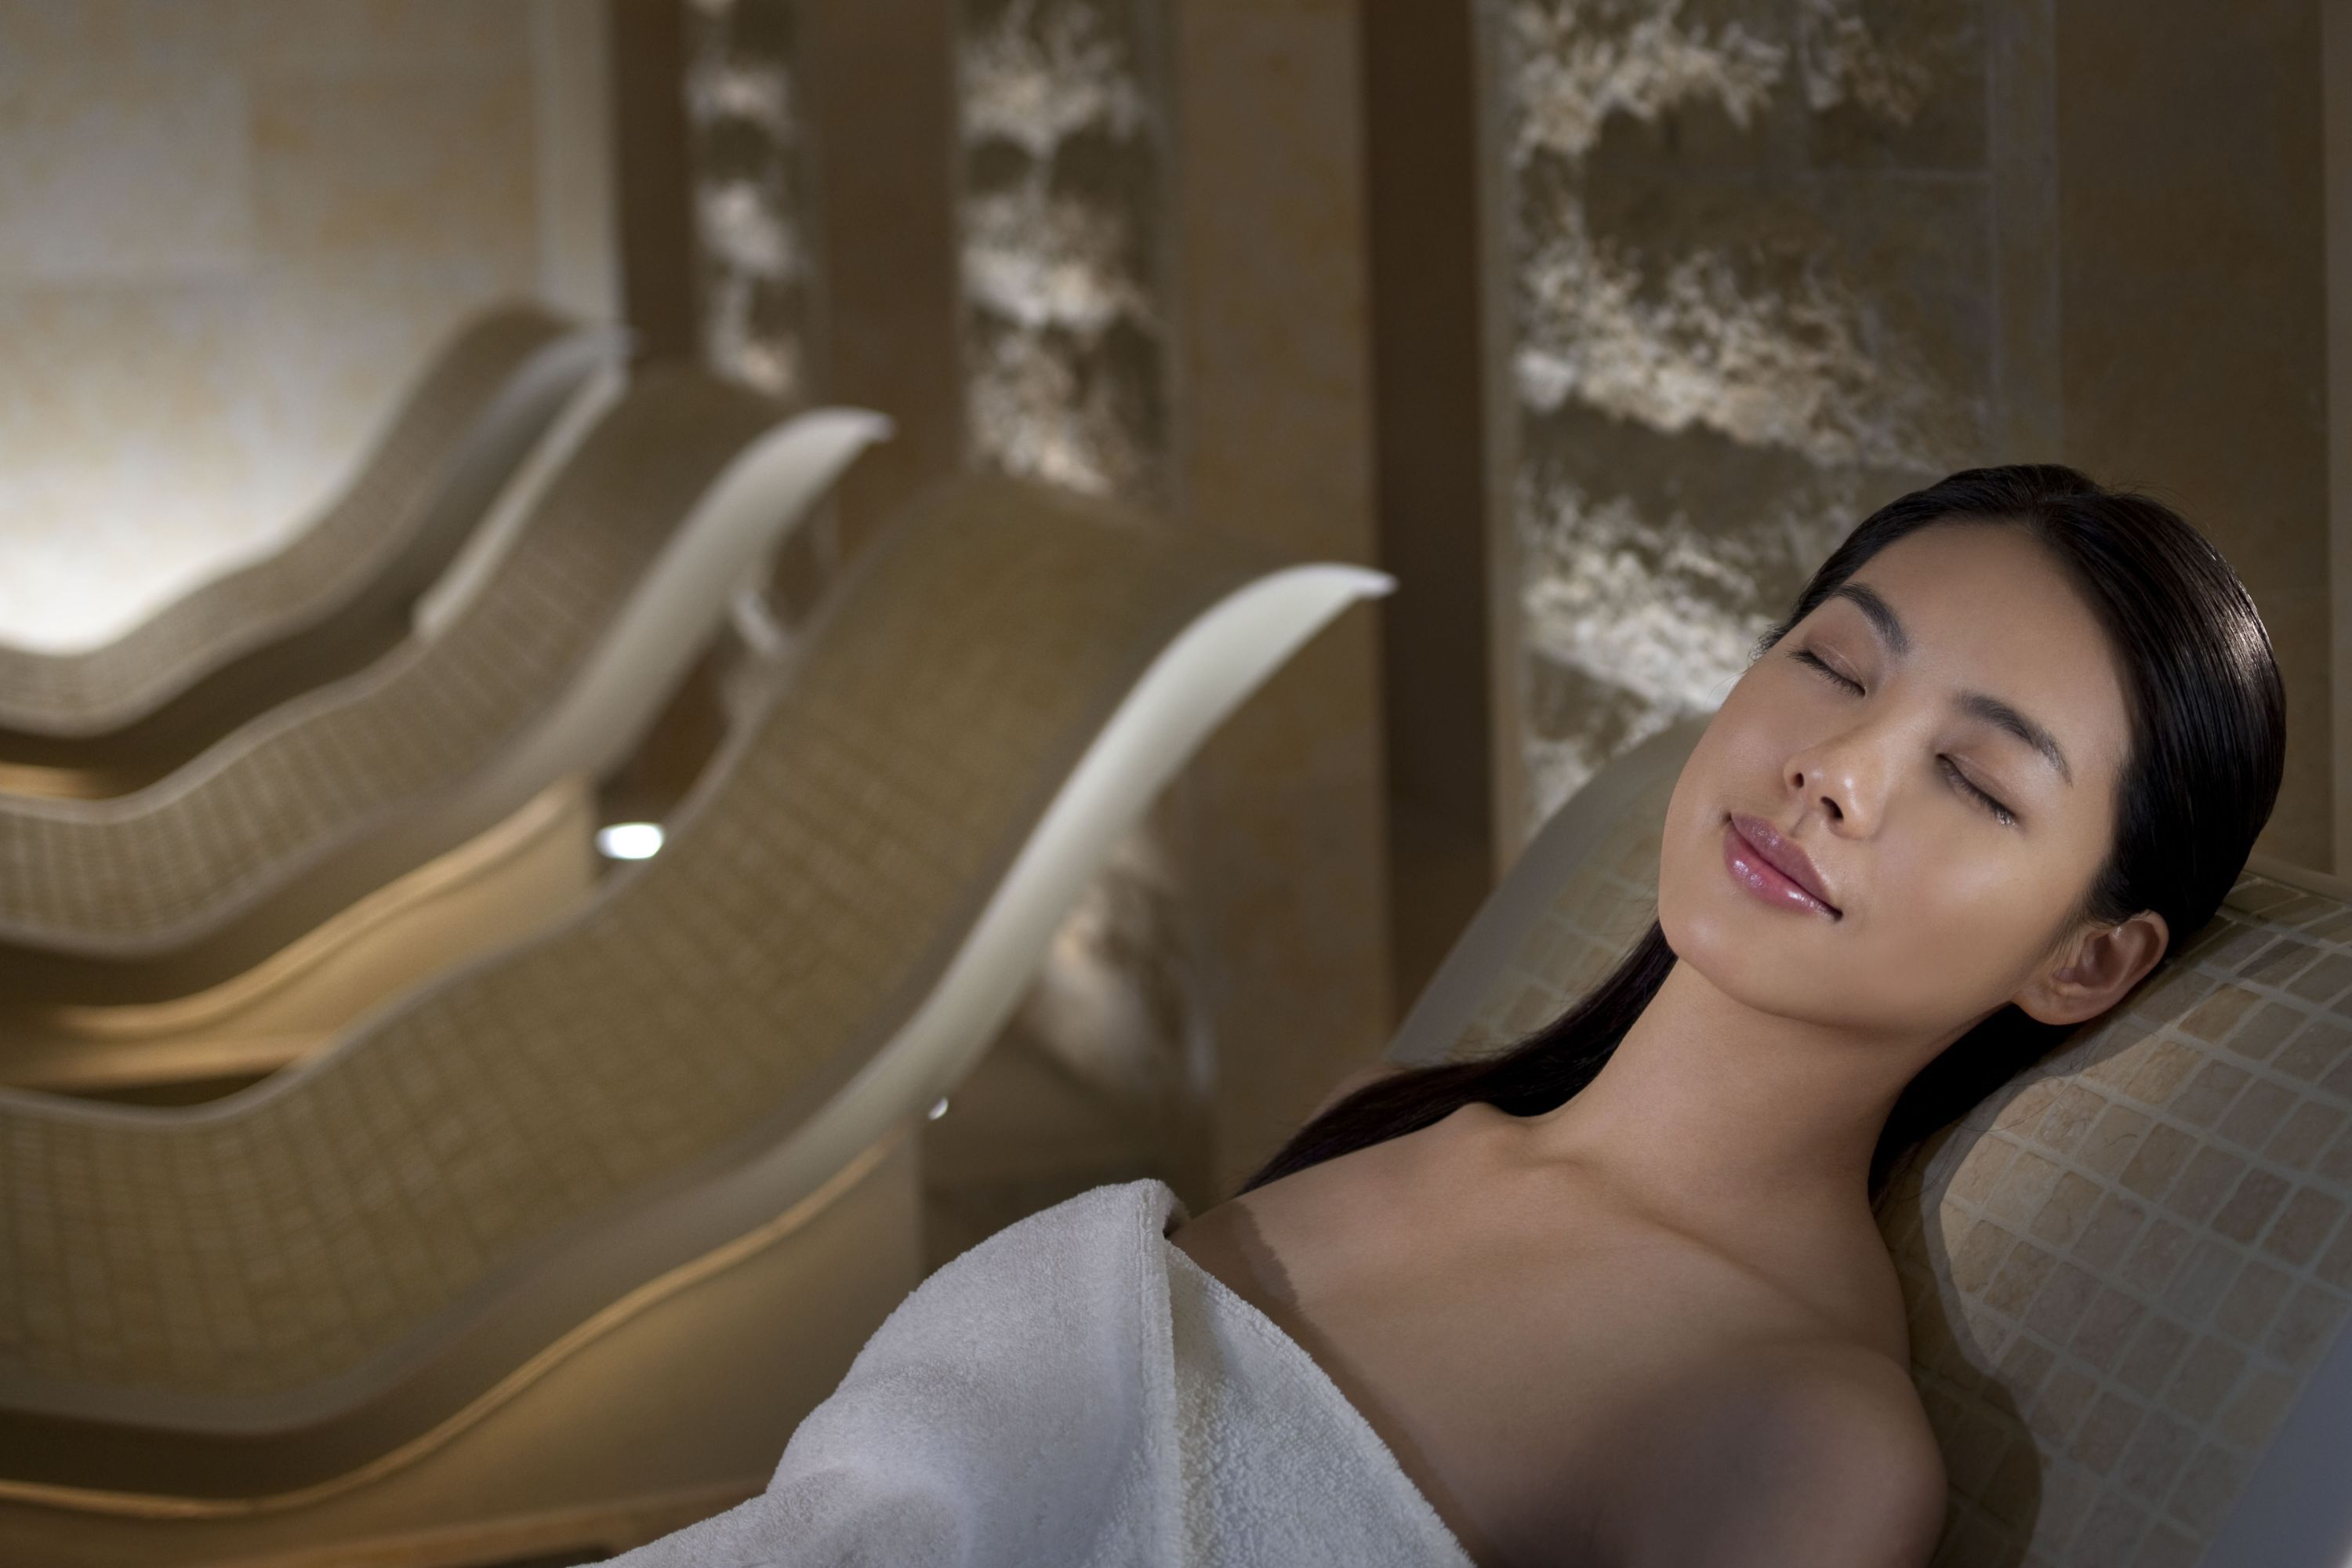 Become a member at The Oriental Spa to enjoy complimentary treatments and unlimited yoga